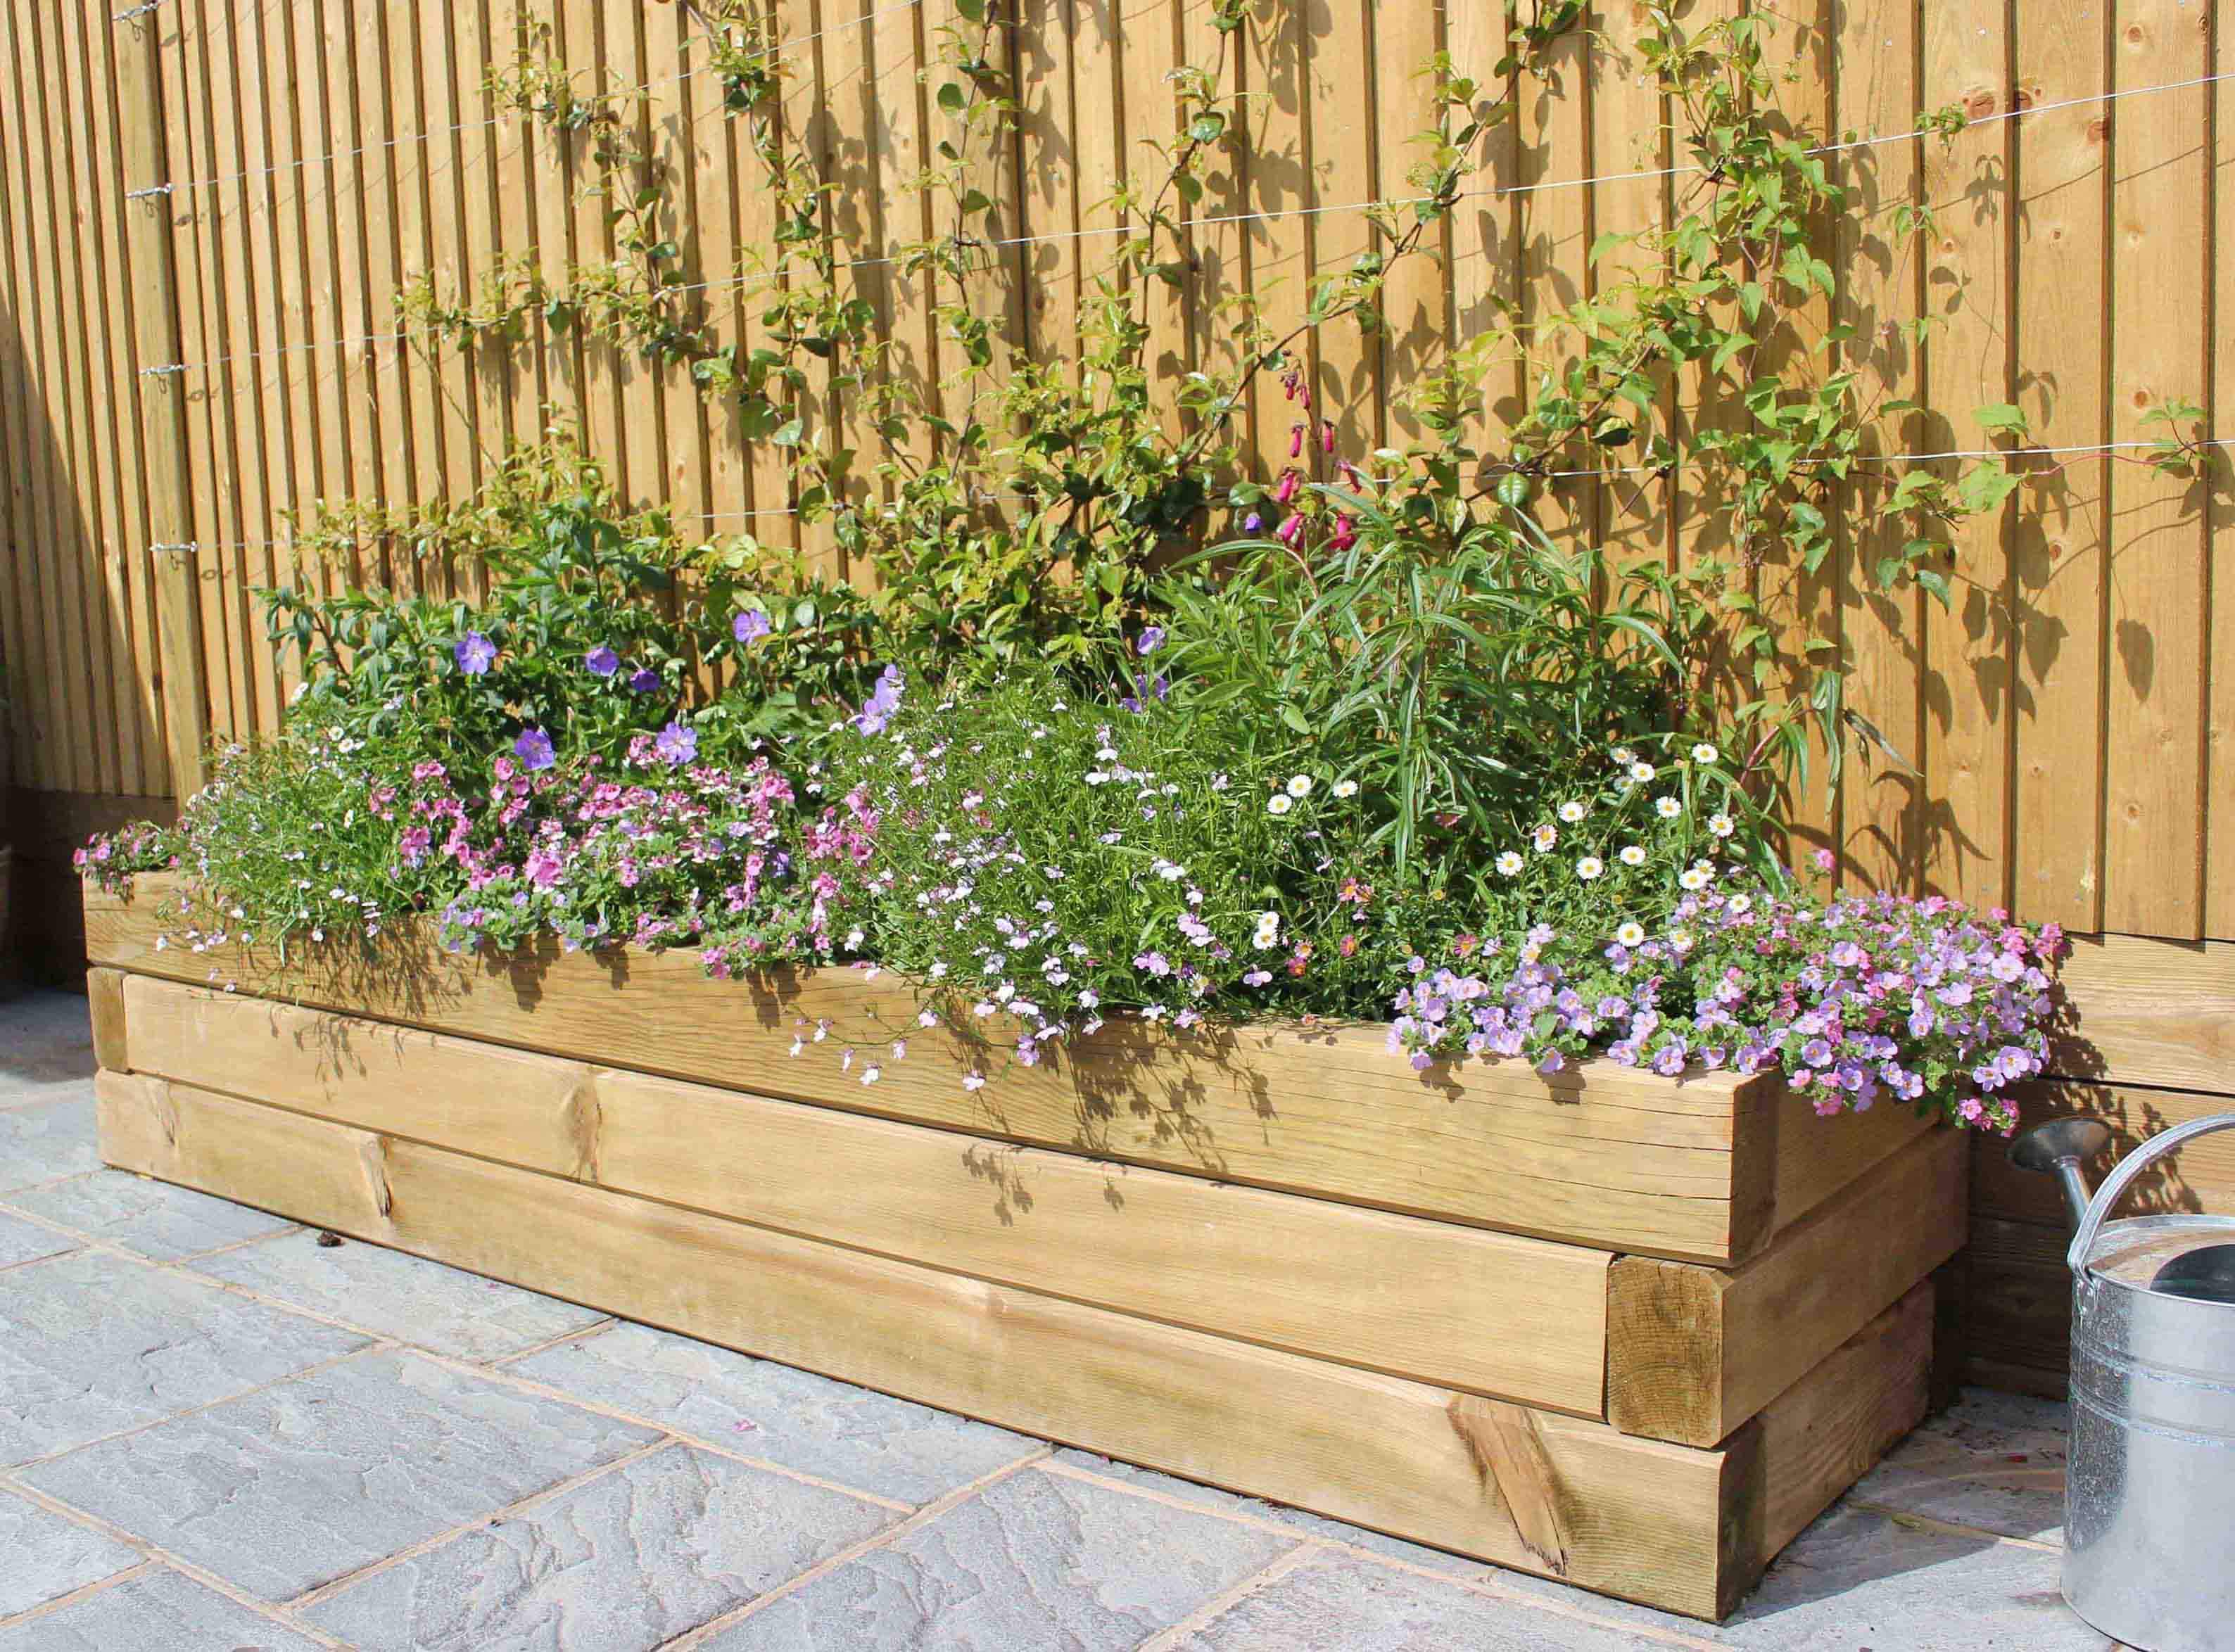 Wooden Raised Garden Beds Page